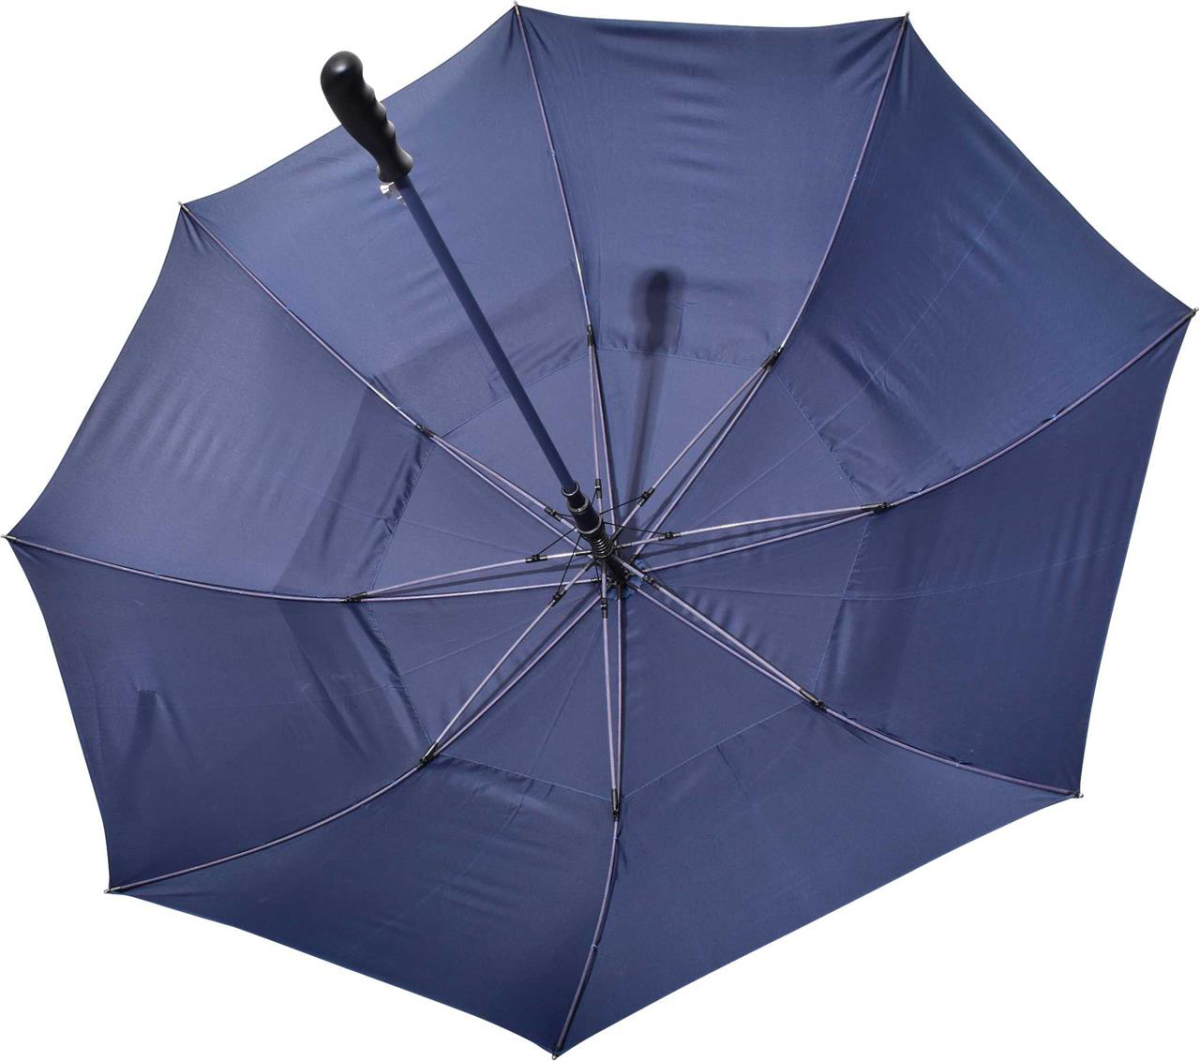 CUSTOM BRANDED - STORMPROOF CYCLONE®️ - Heavy Duty Storm Umbrella With Double Layer Wind Vent System, Wind Proof Fibreglass Frame - Auto-Open Push Button Feature